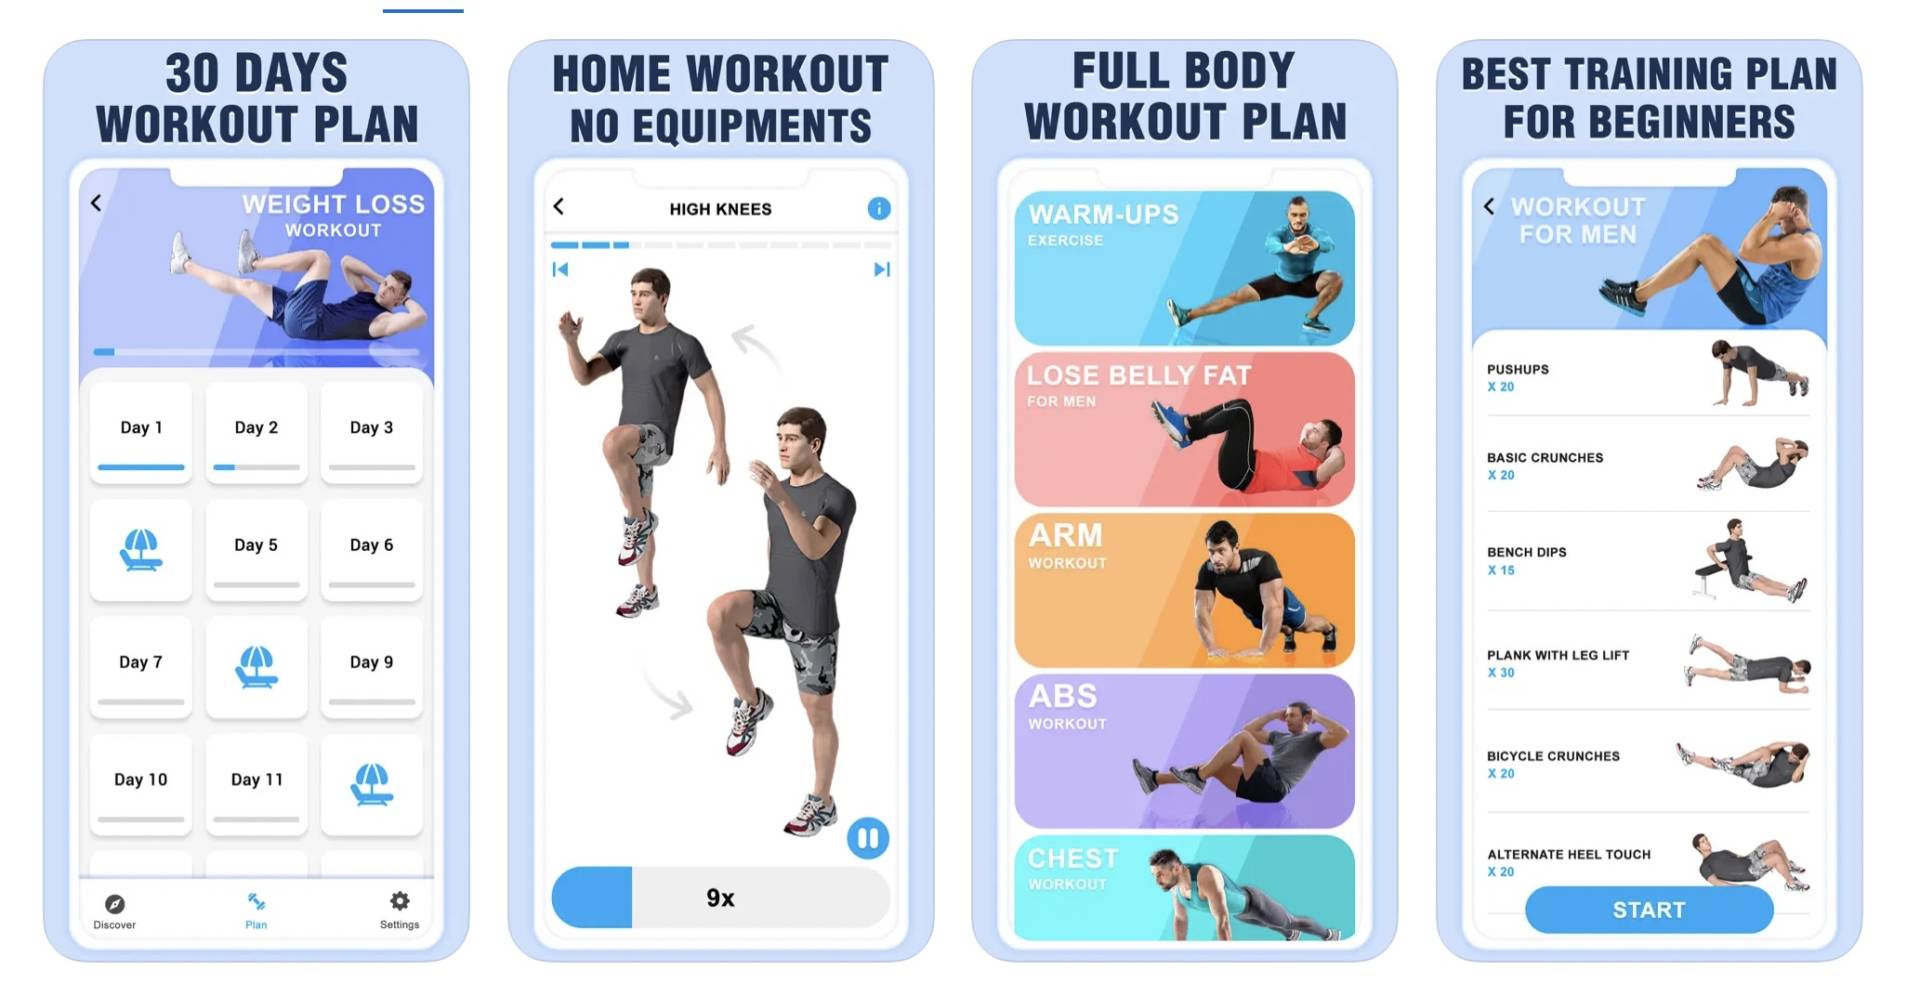 Aplikácia Weight Loss pre iPhone a Android